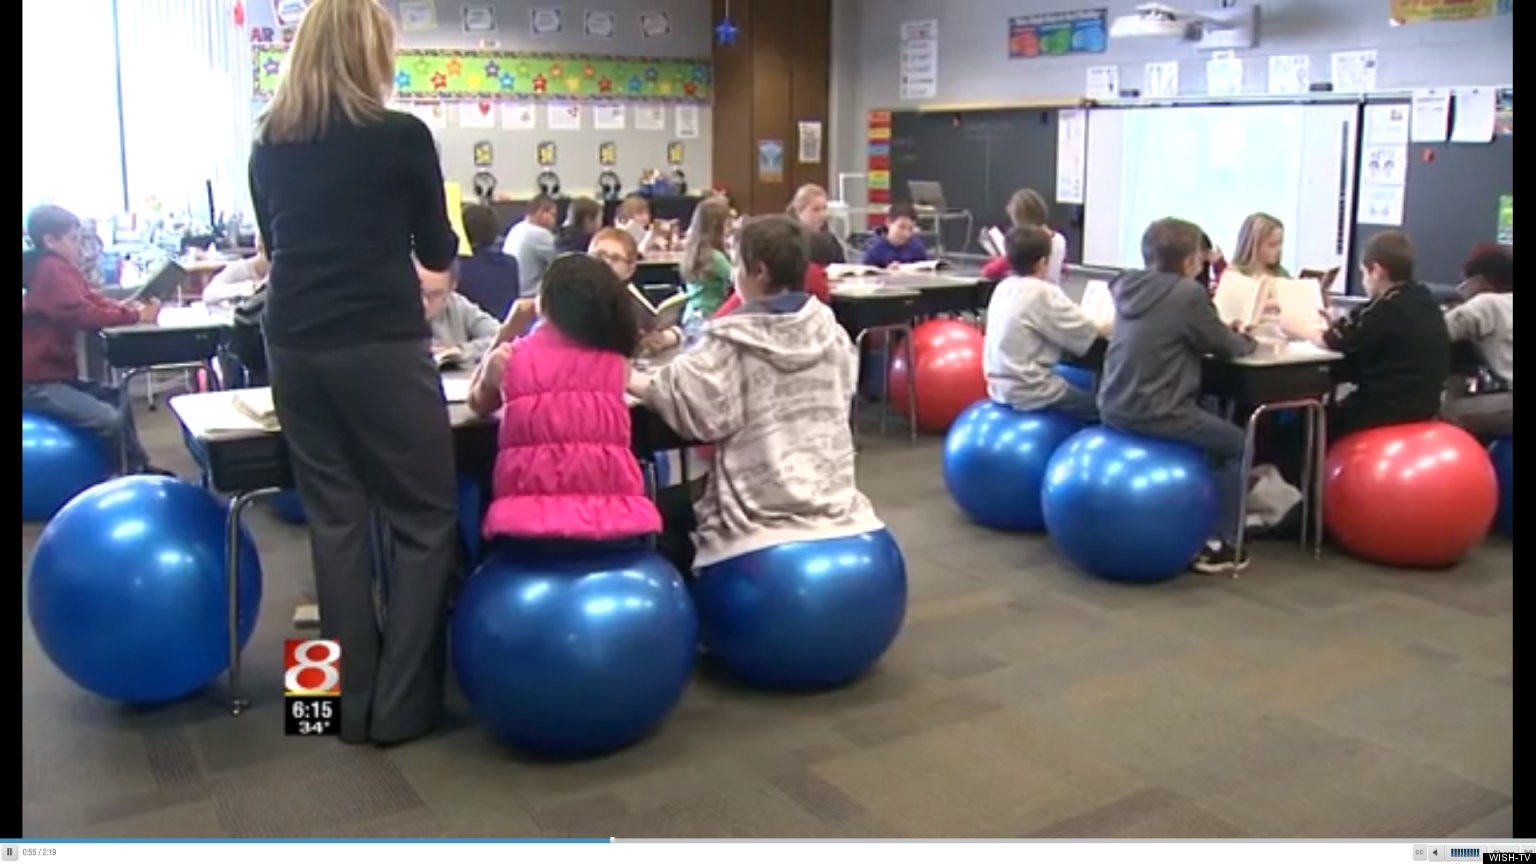 Sara Wright, Indiana Teacher, Swaps Exercise Balls For Desk Chairs In